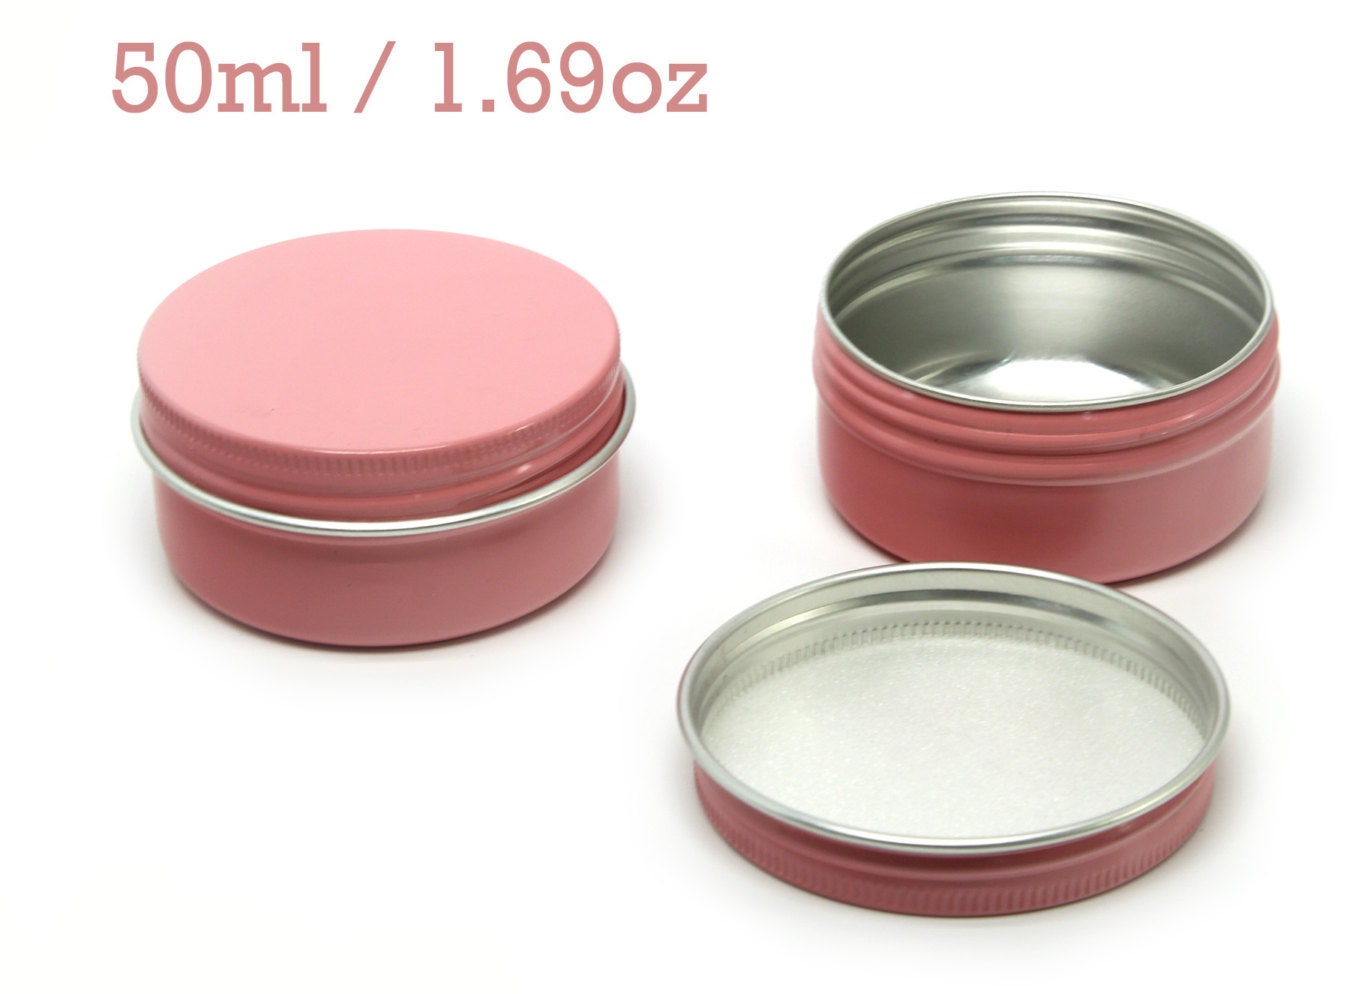 1oz Metal Flat Tins With Rolled Edge Covers - BeScented Soap and